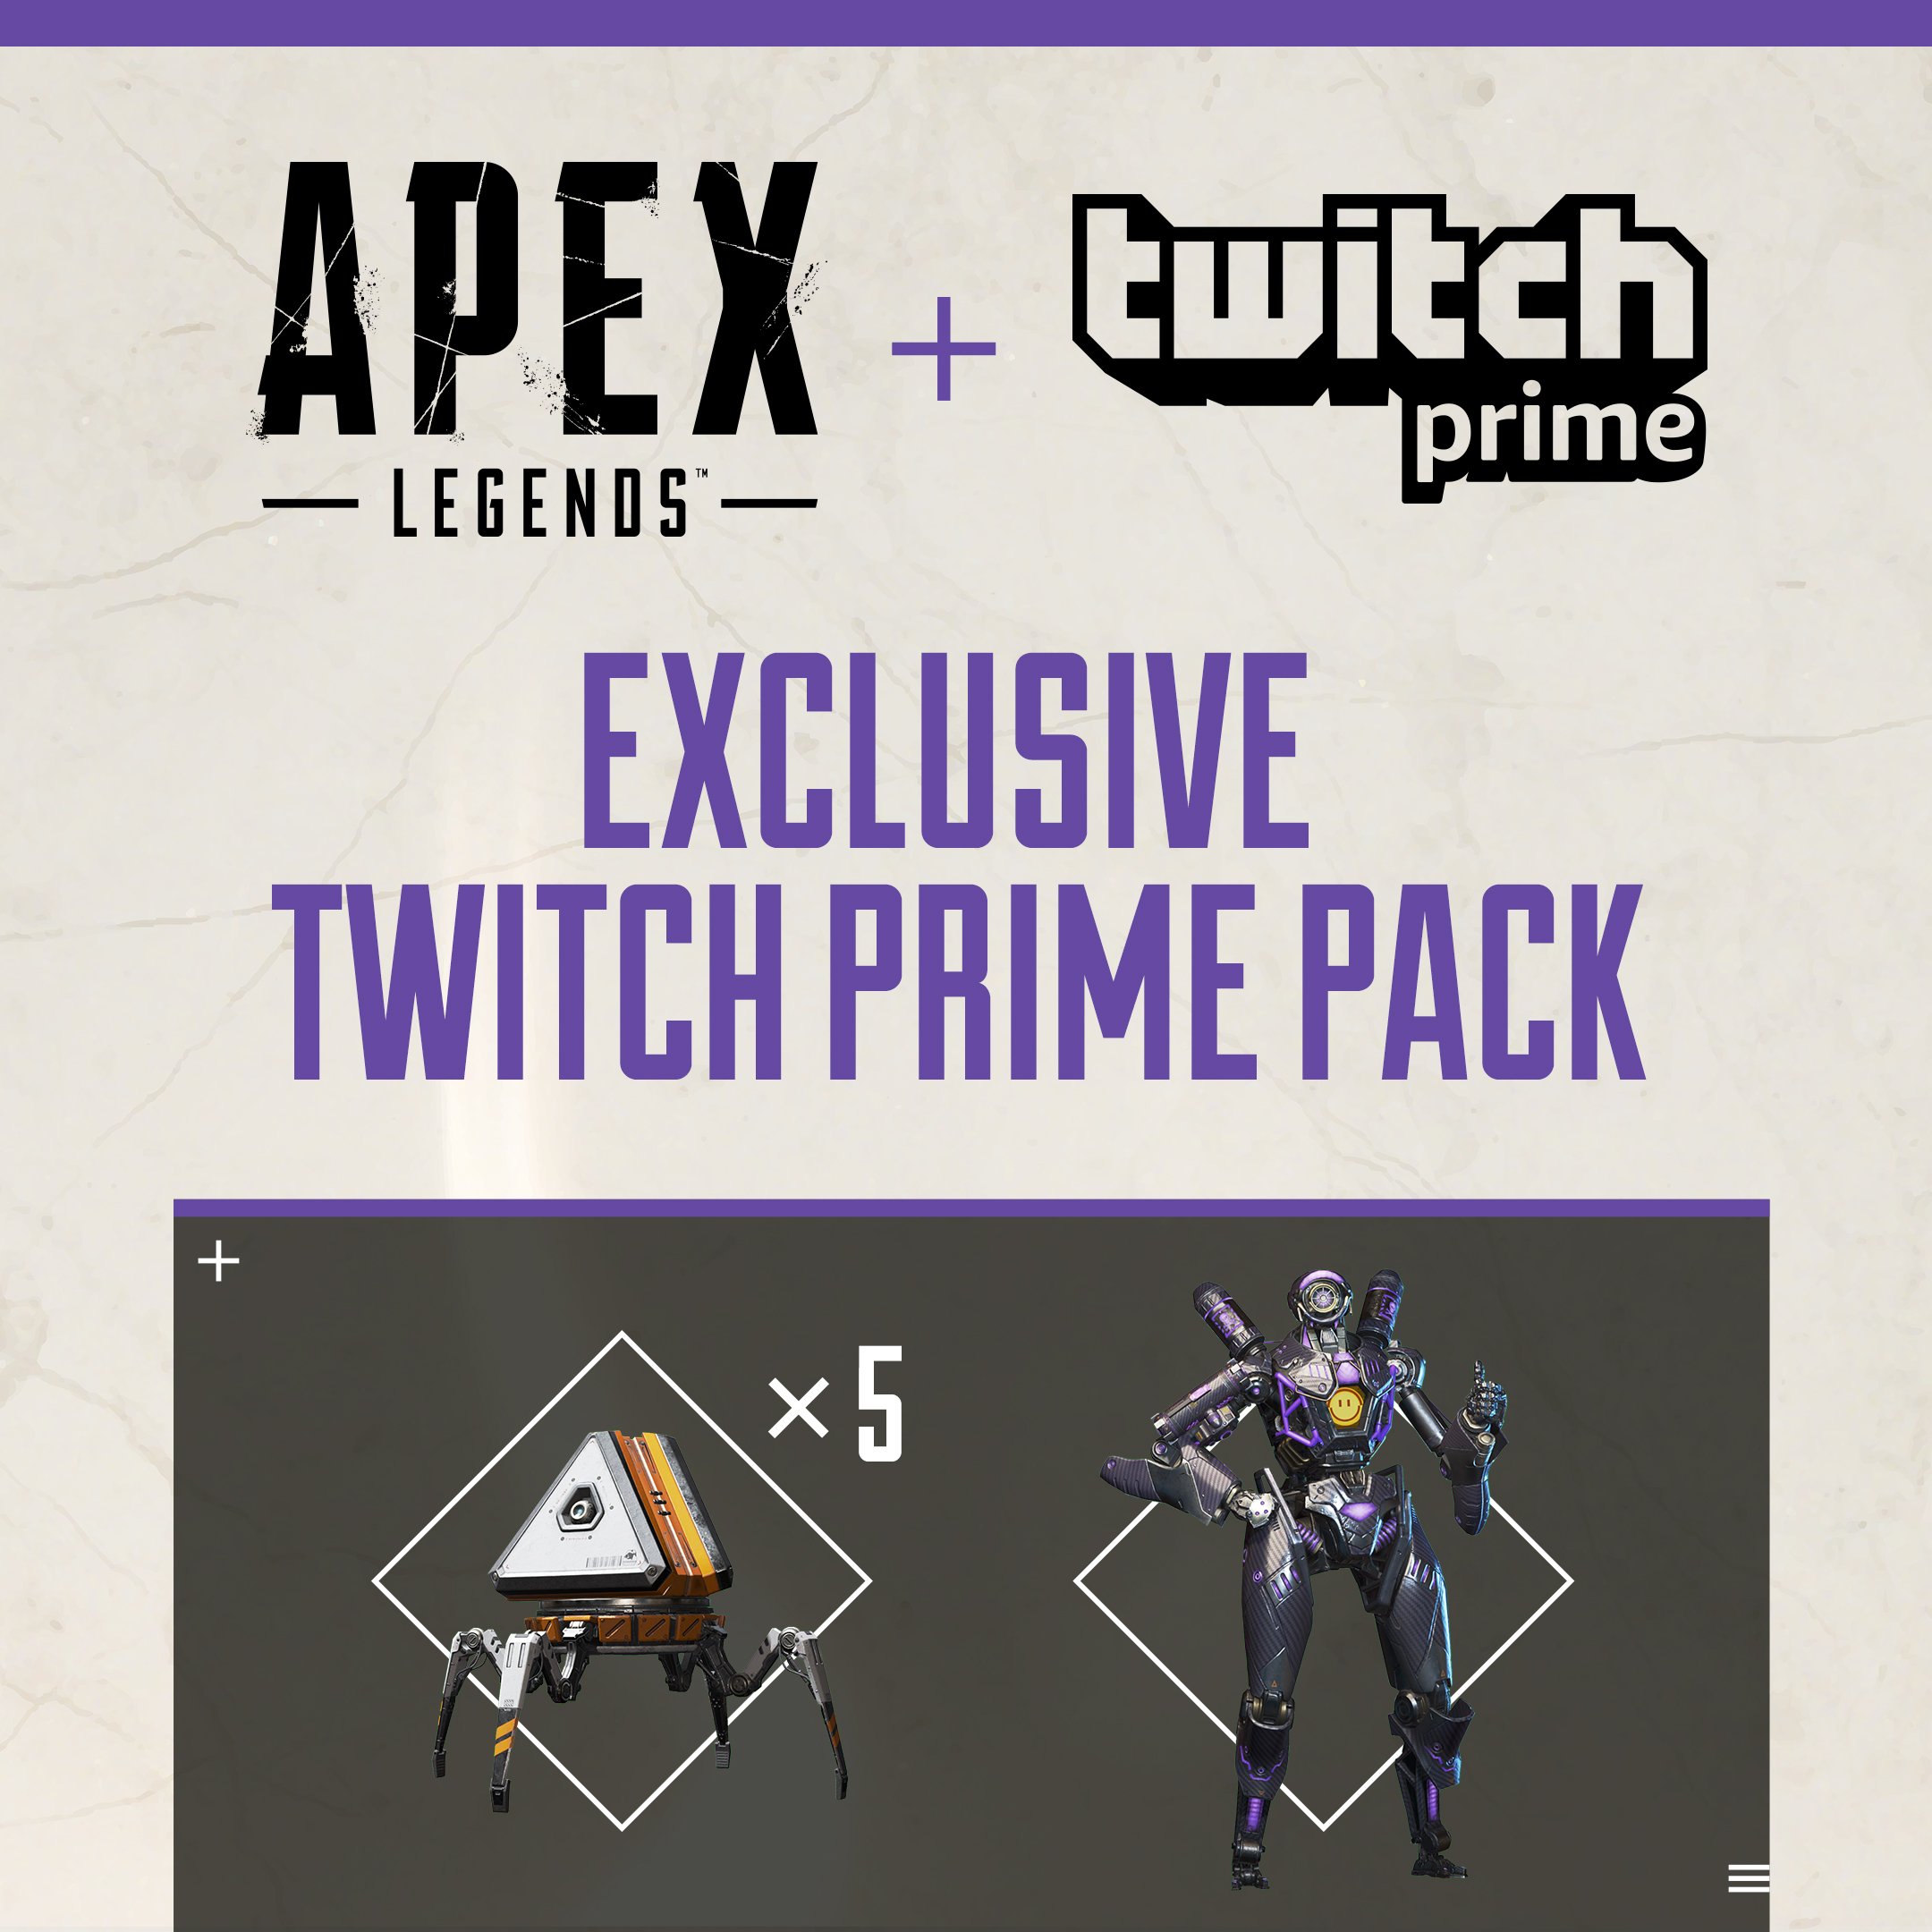 Coming to Twitch Prime in February!